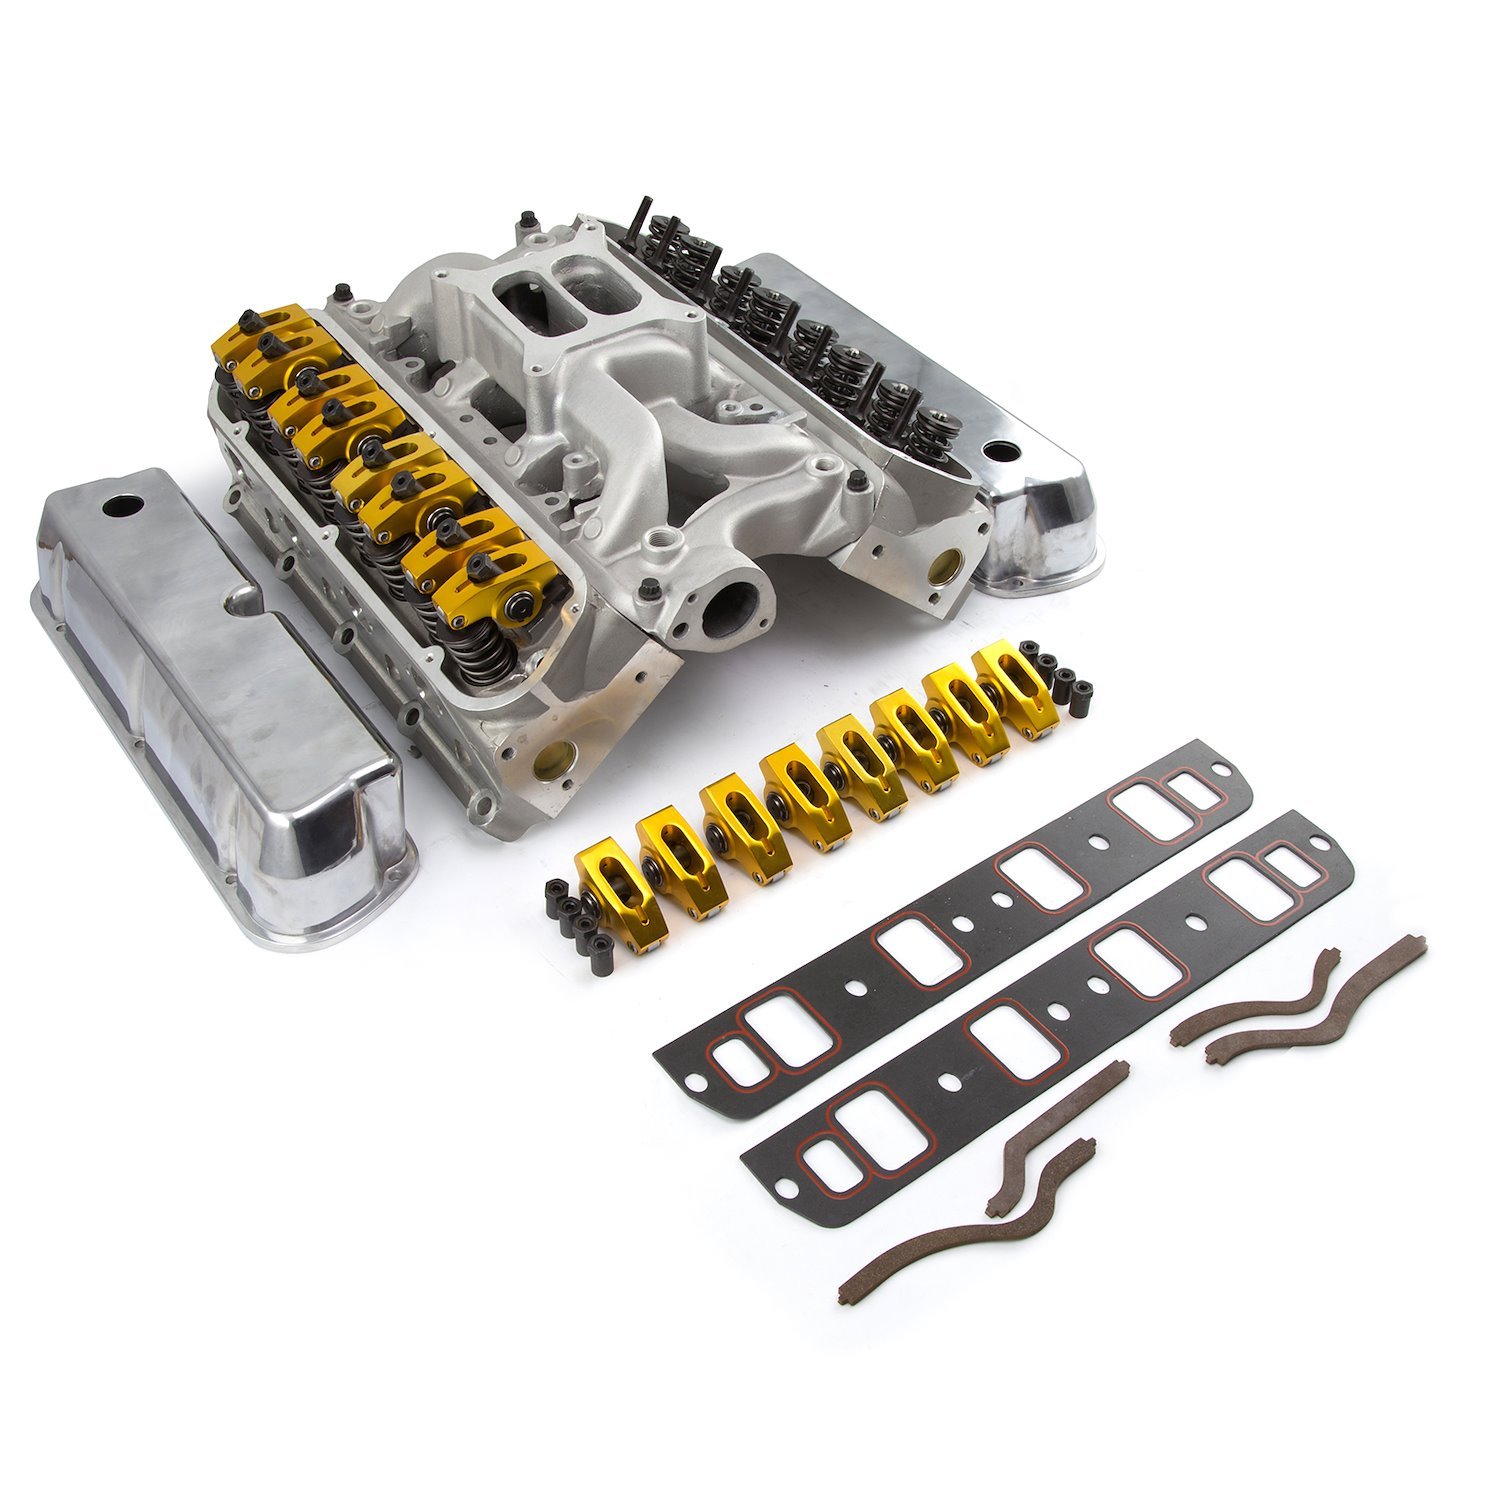 Ford SB 289 302 Solid Flat Tappet CNC Top End Engine Kit